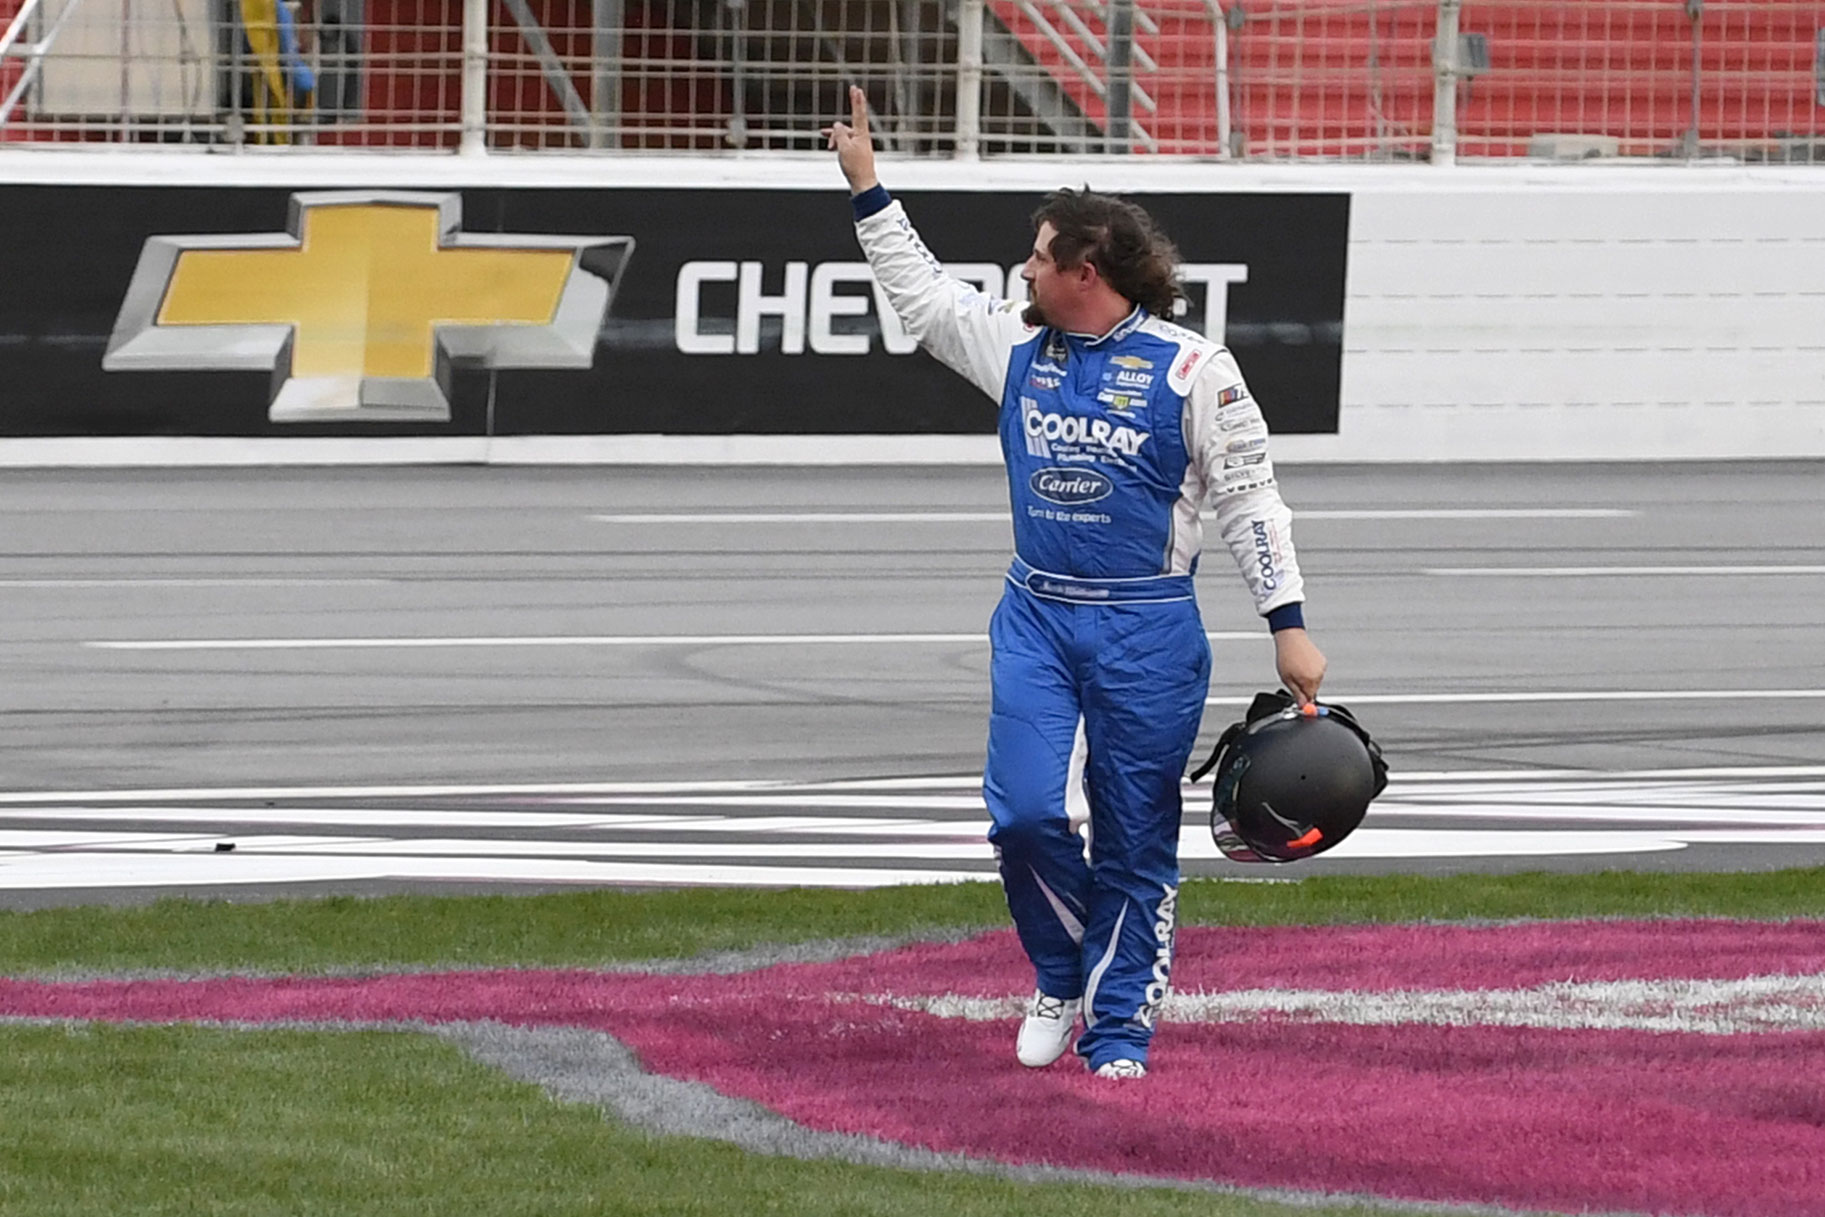 Nascar driver Josh Williams waving to the crowd at a race